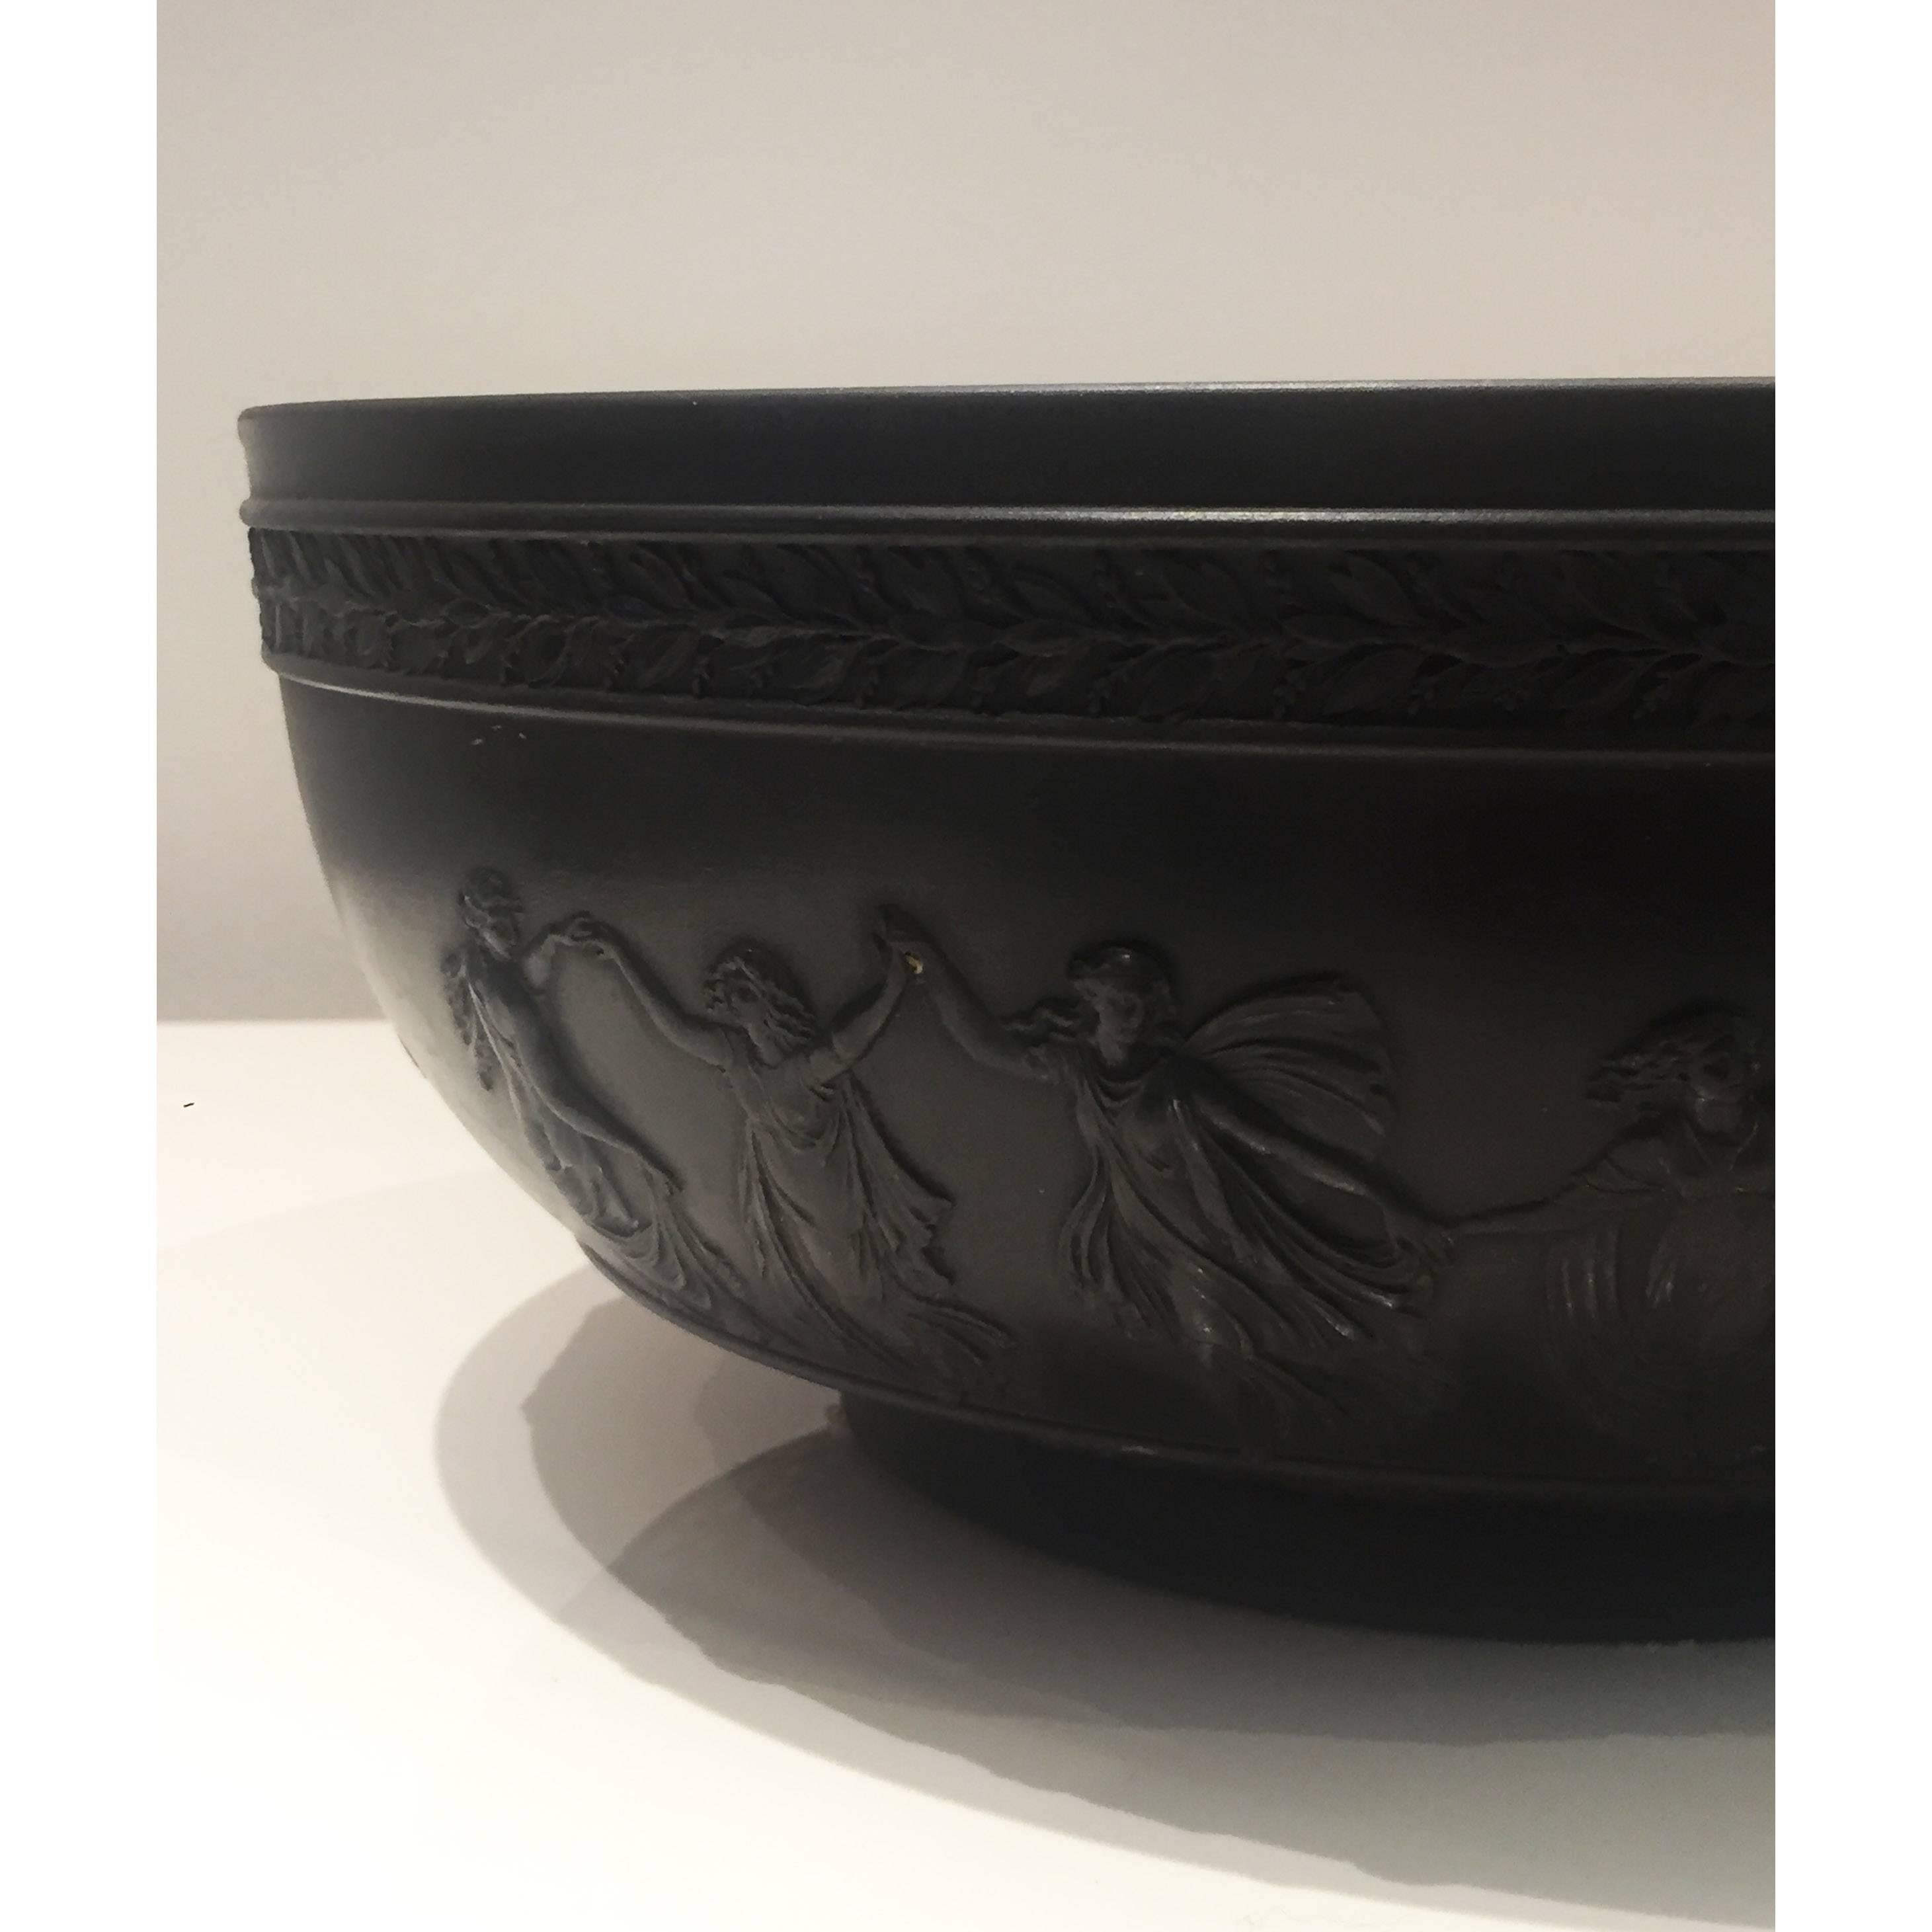 Beautiful original basalt bowl from 1860's. This large antique bowl was one of the earliest of its kind to be produced by Wedgwood.

Excellent antique condition.